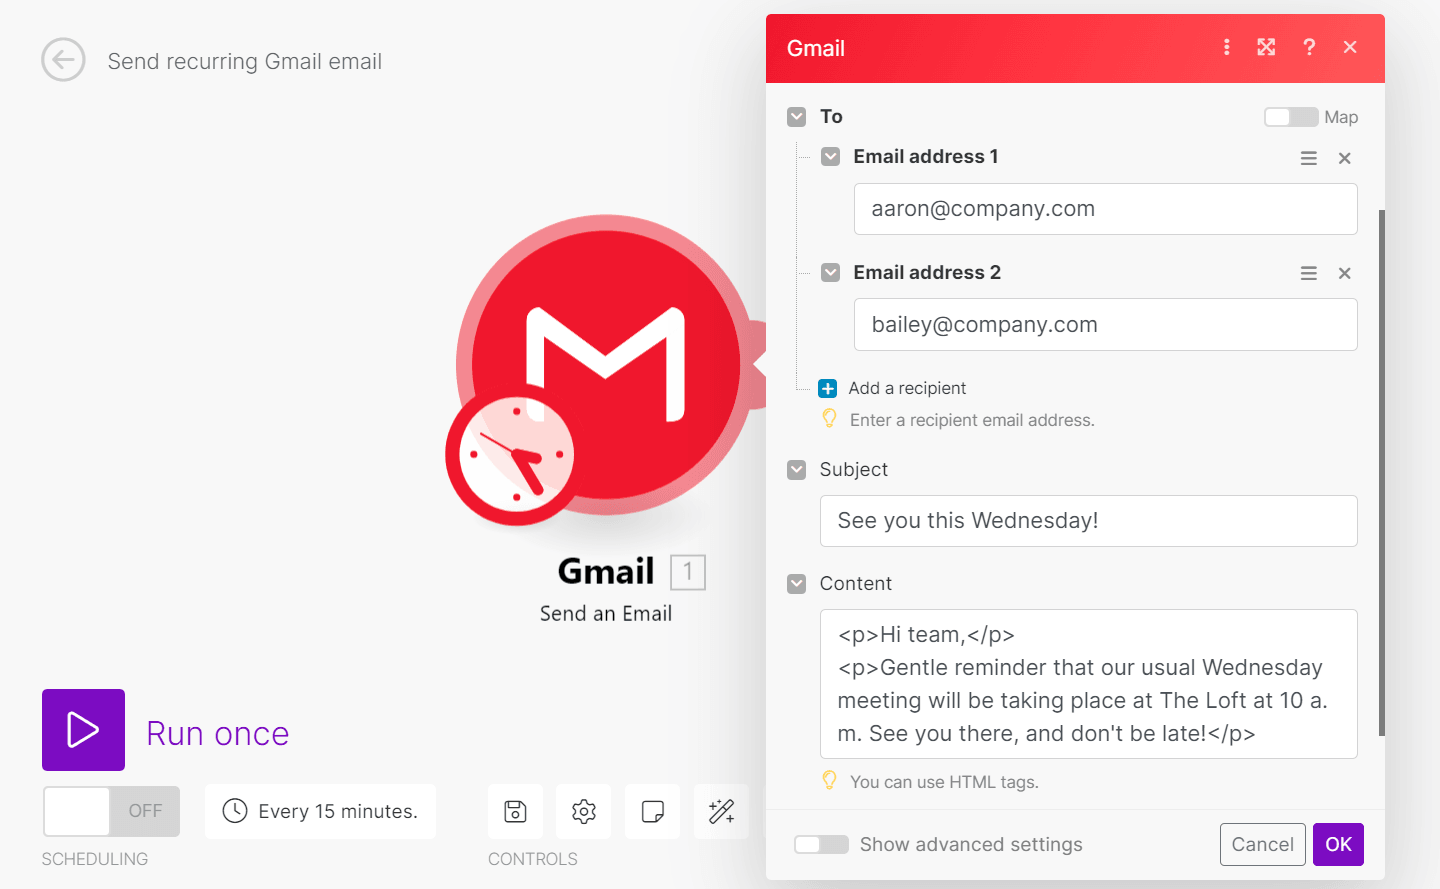 Send an Email in Gmail